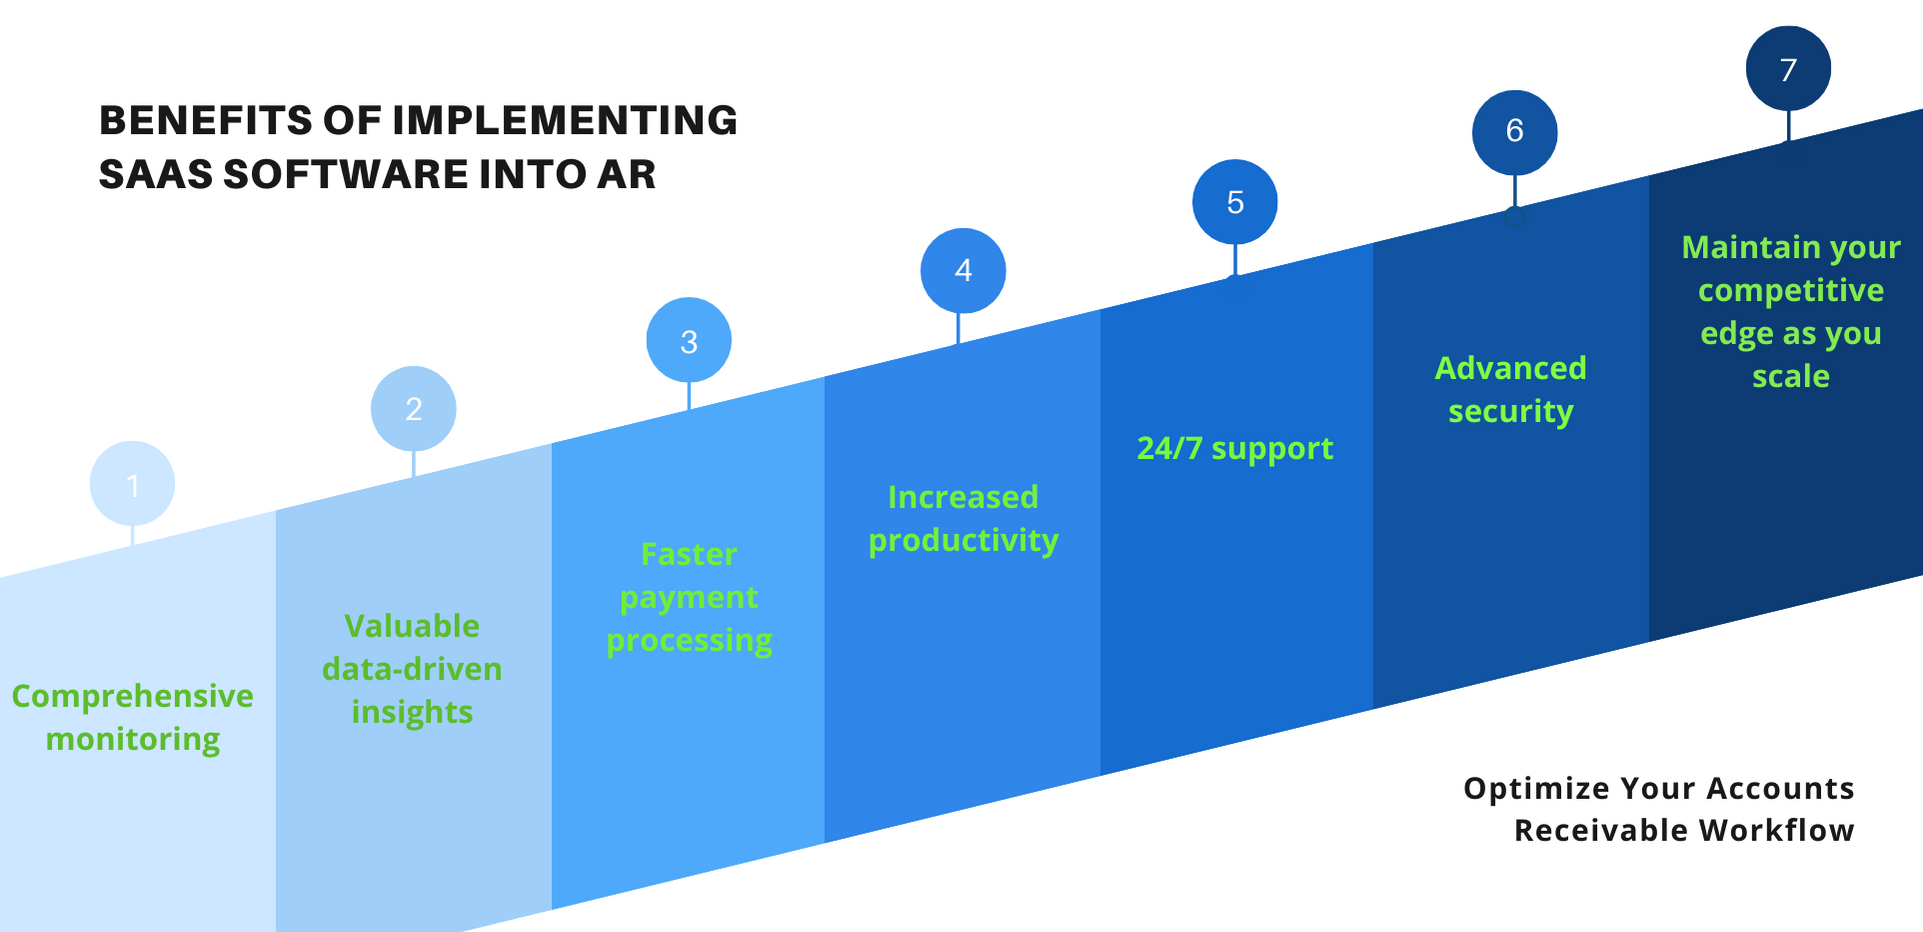 A graphic showing the seven benefits of implementing SaaS technology into your AR workflow